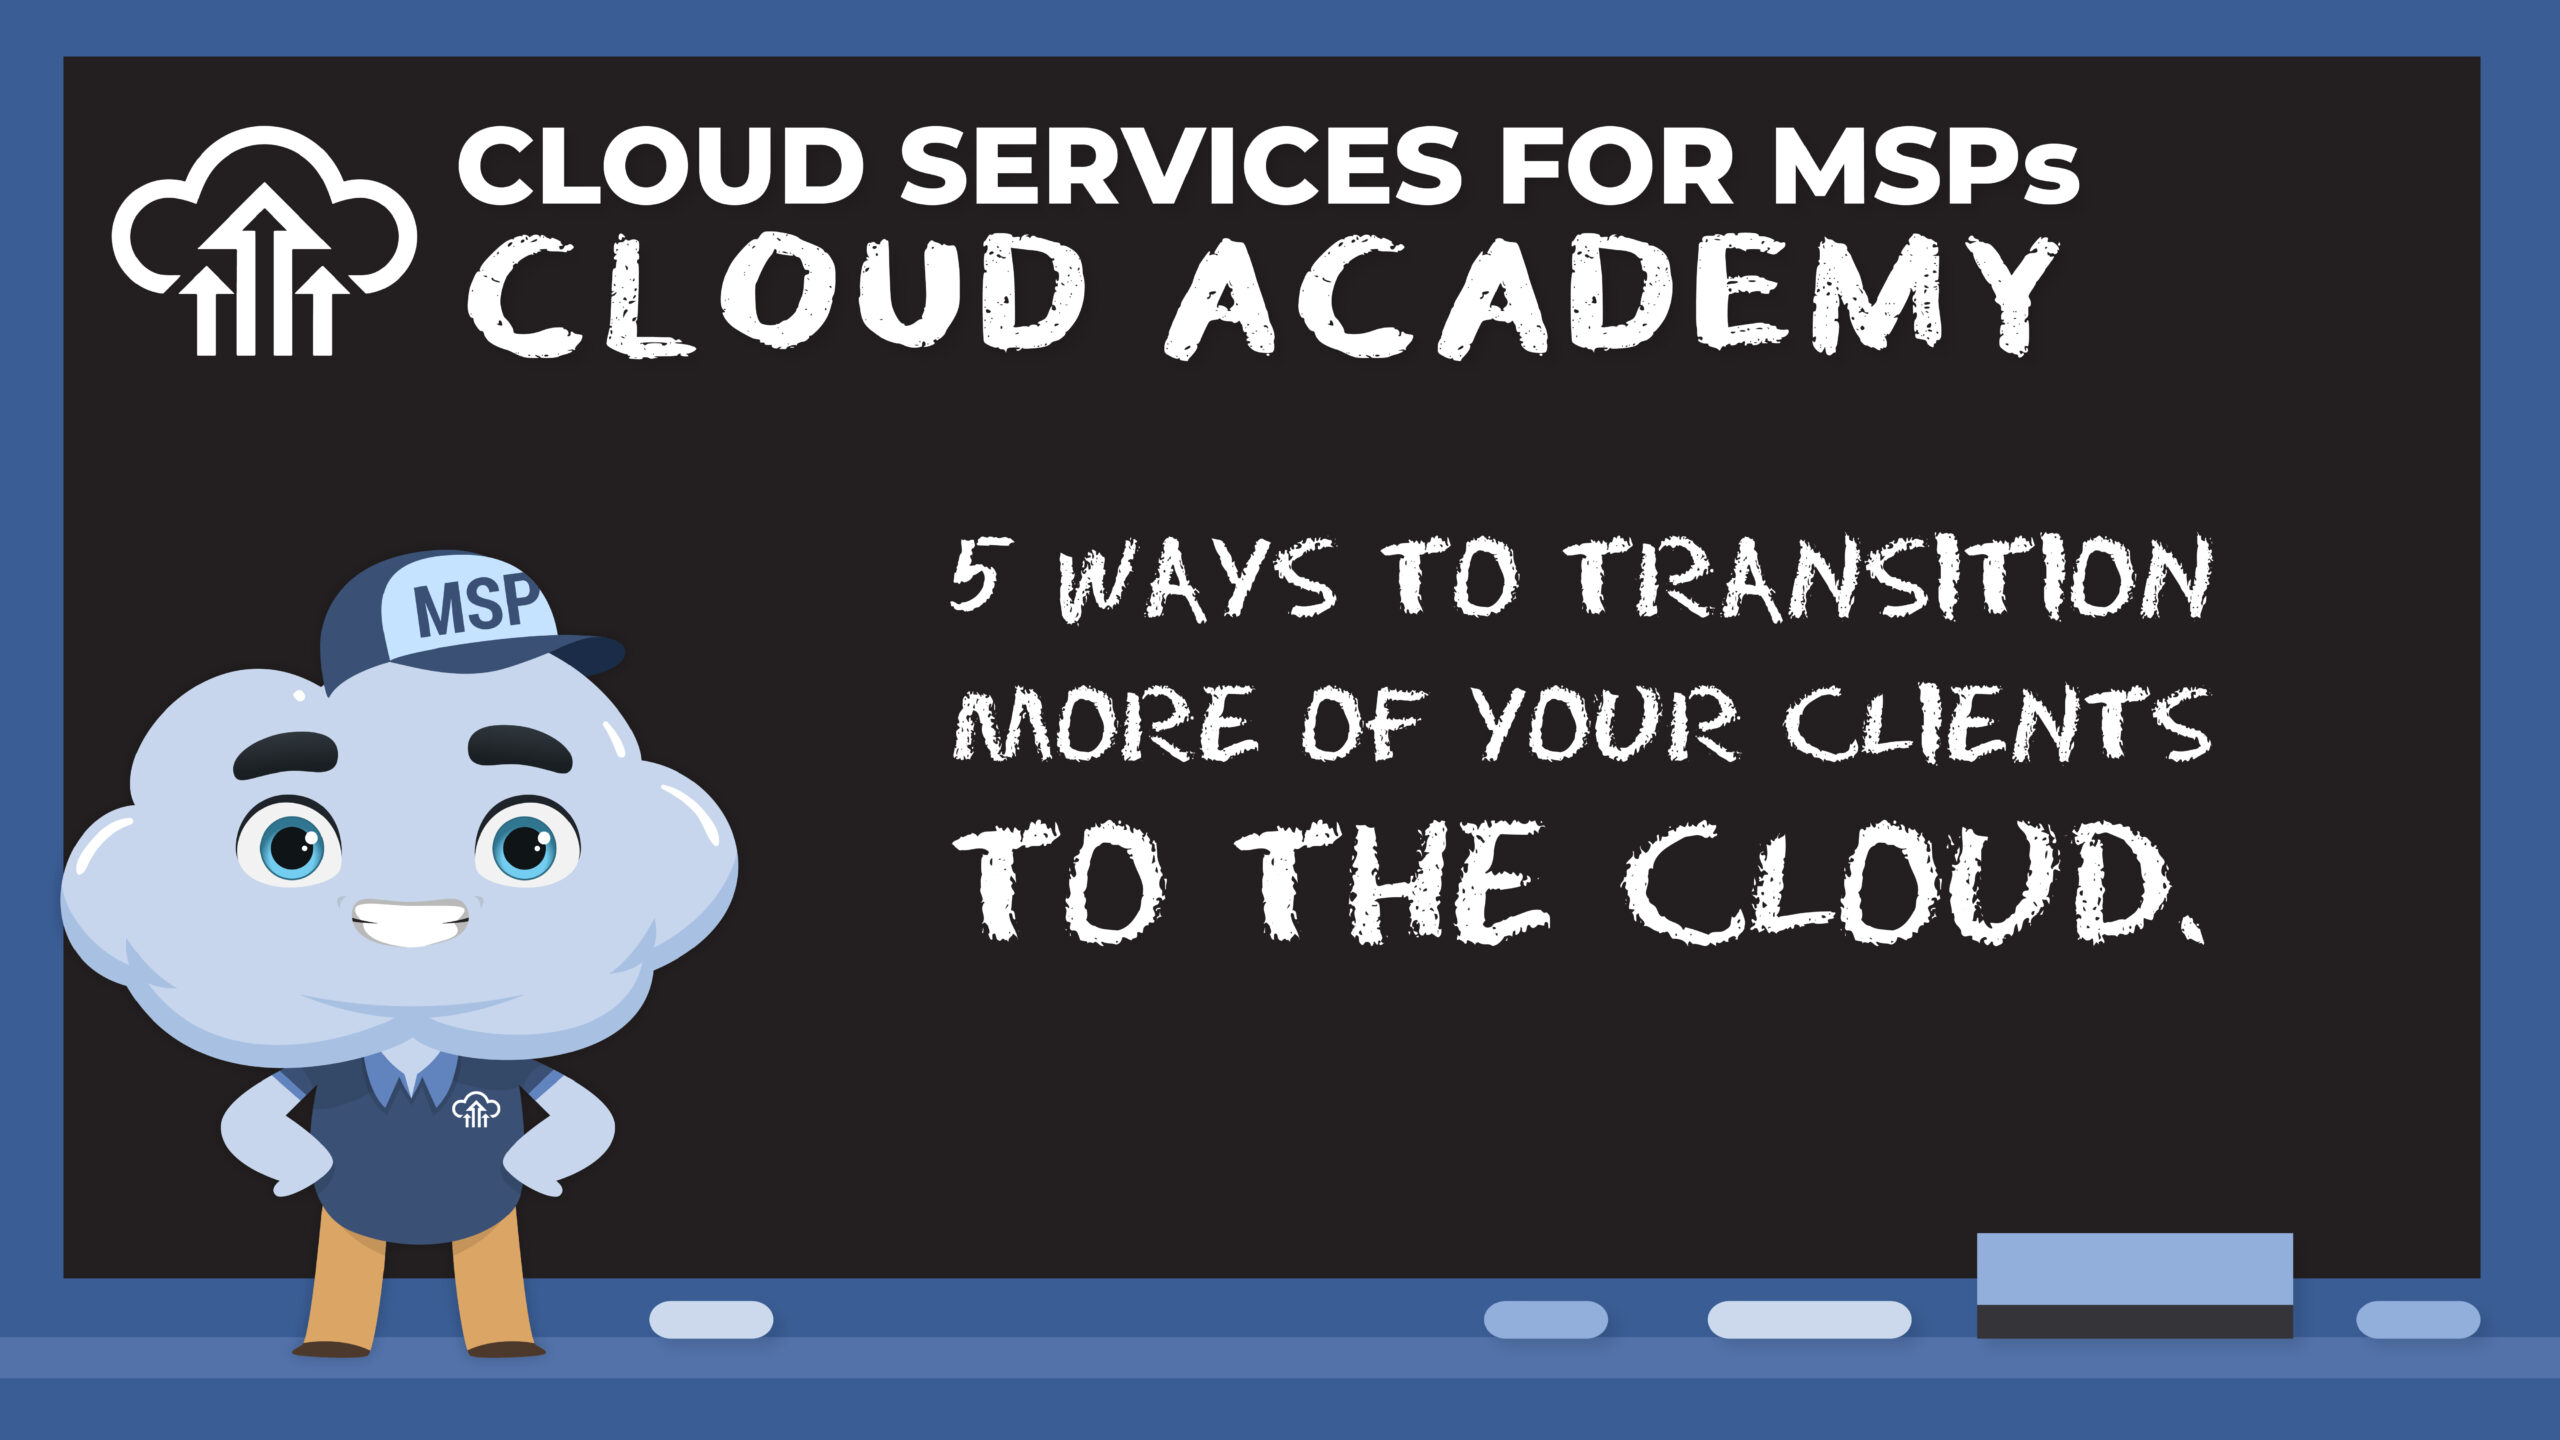 5 Ways to Transition More Clients to Cloud